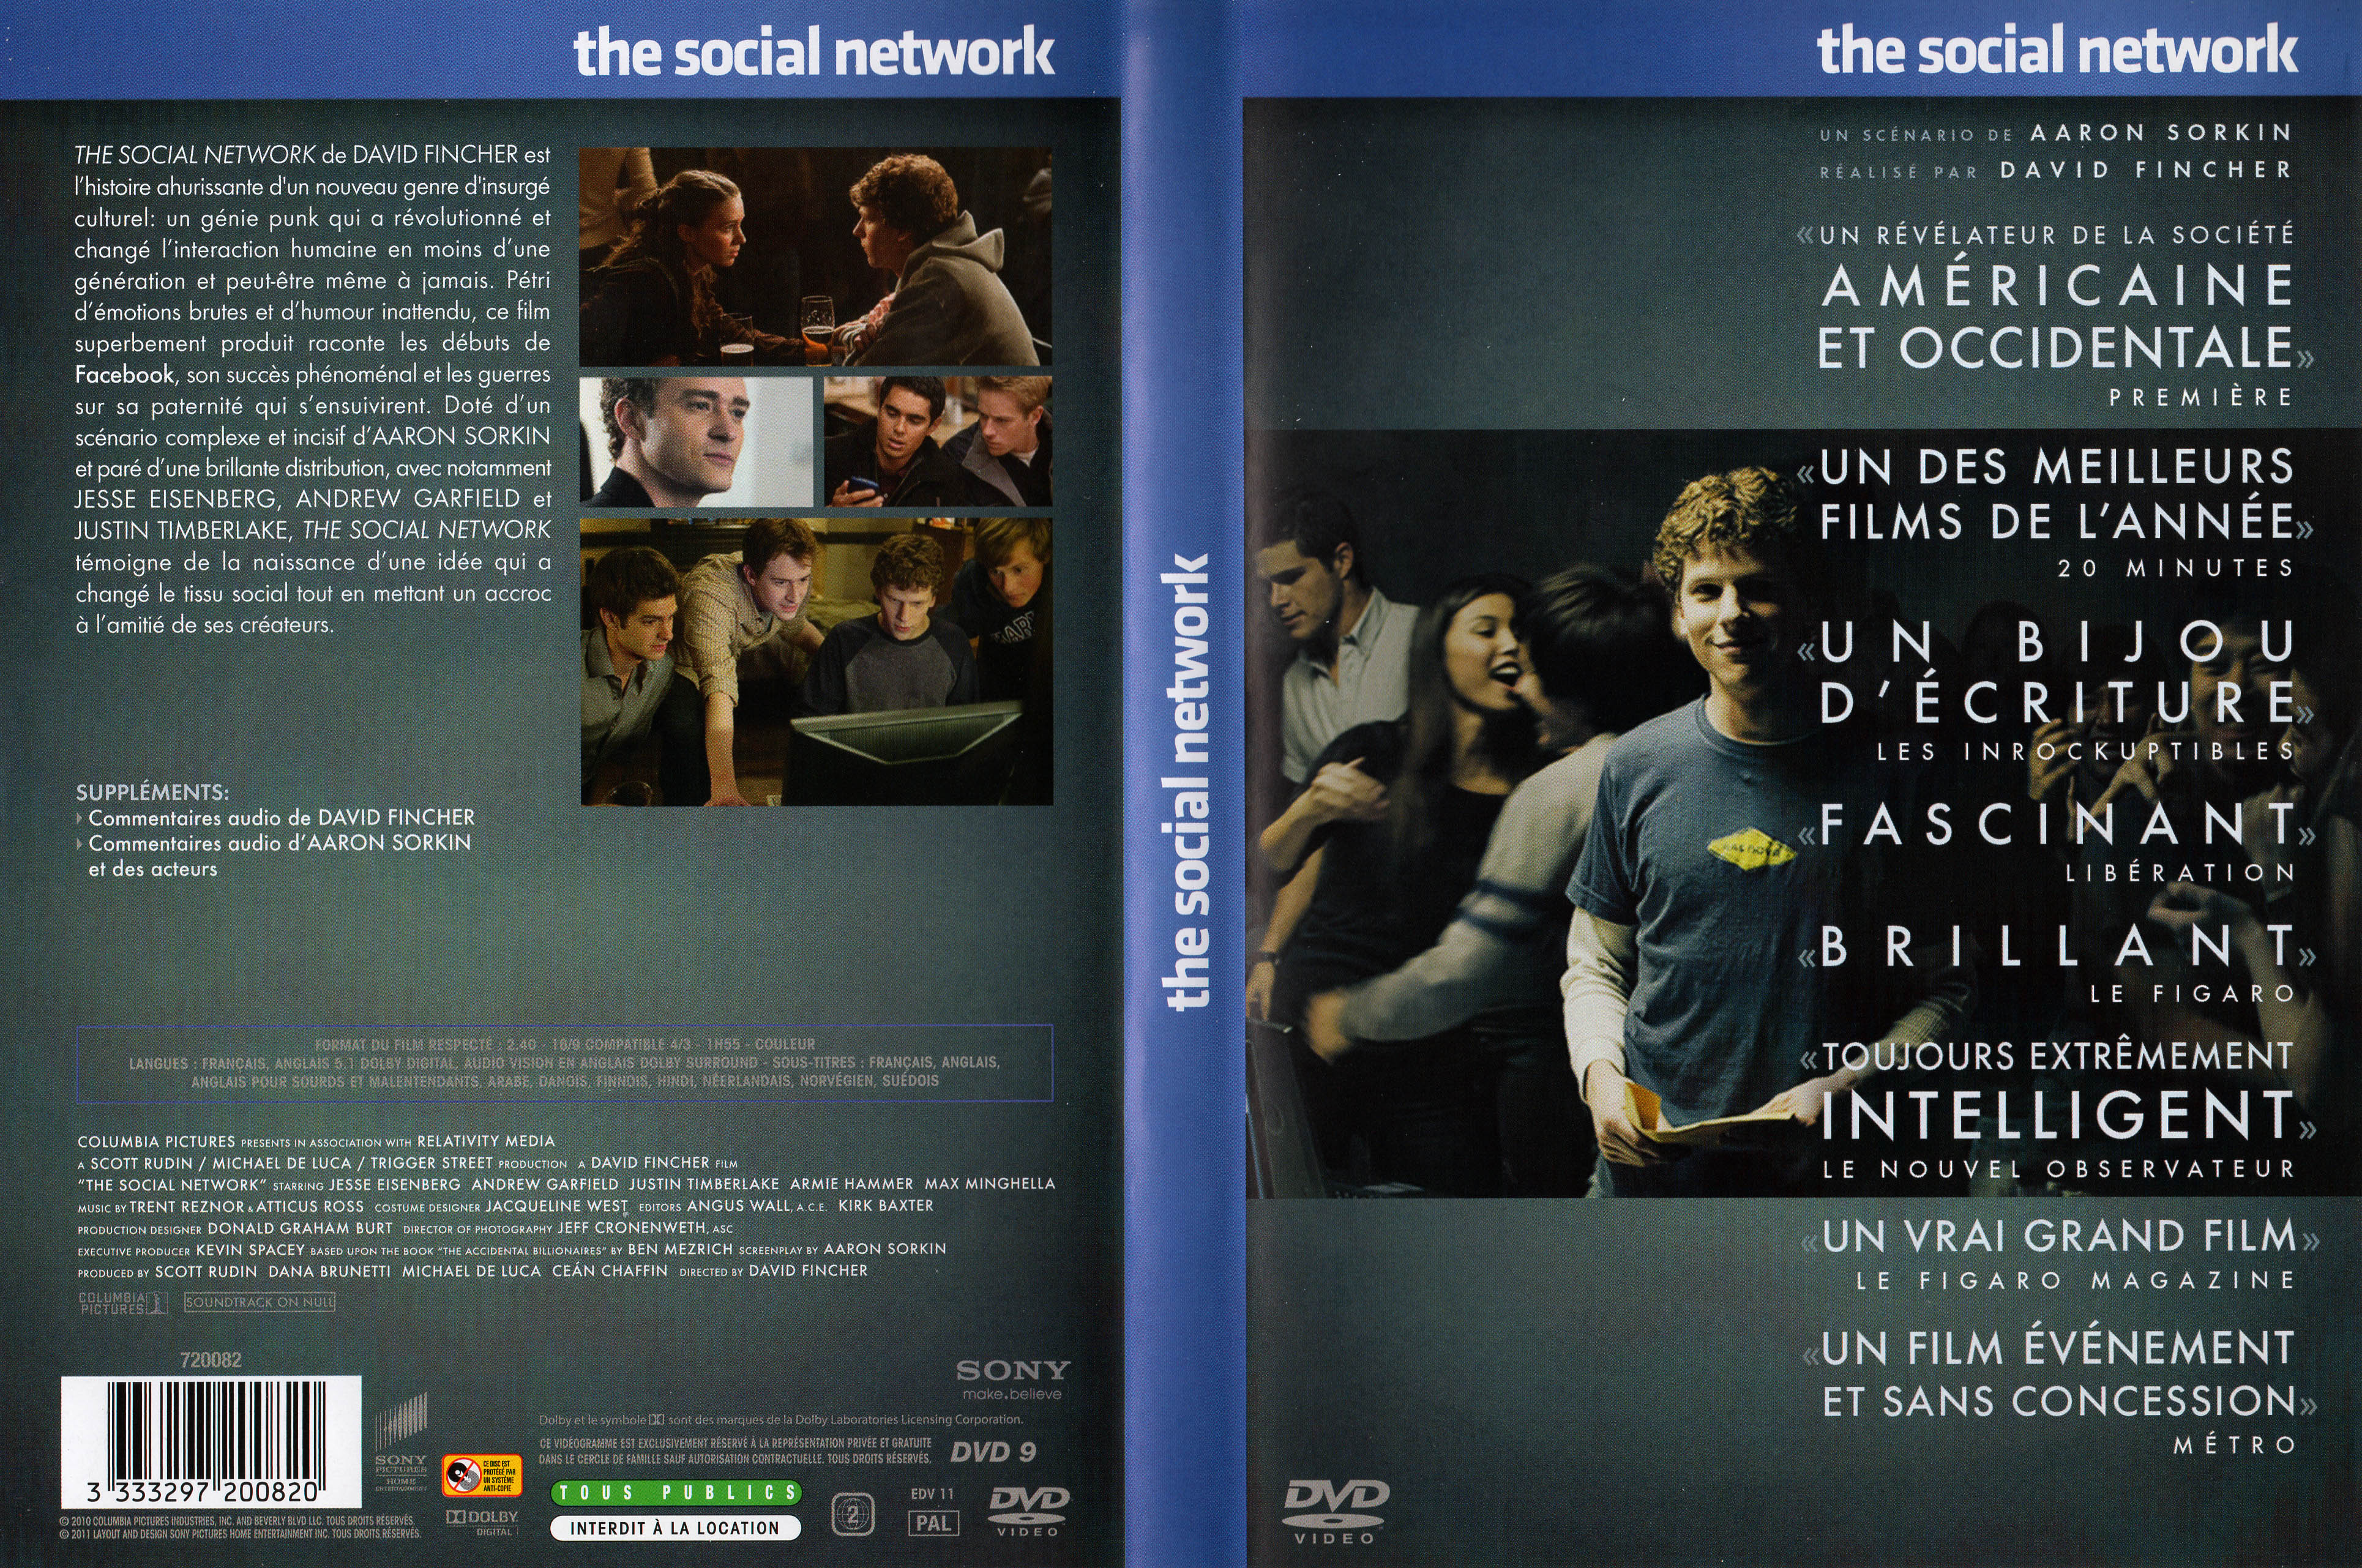 Jaquette DVD The social network